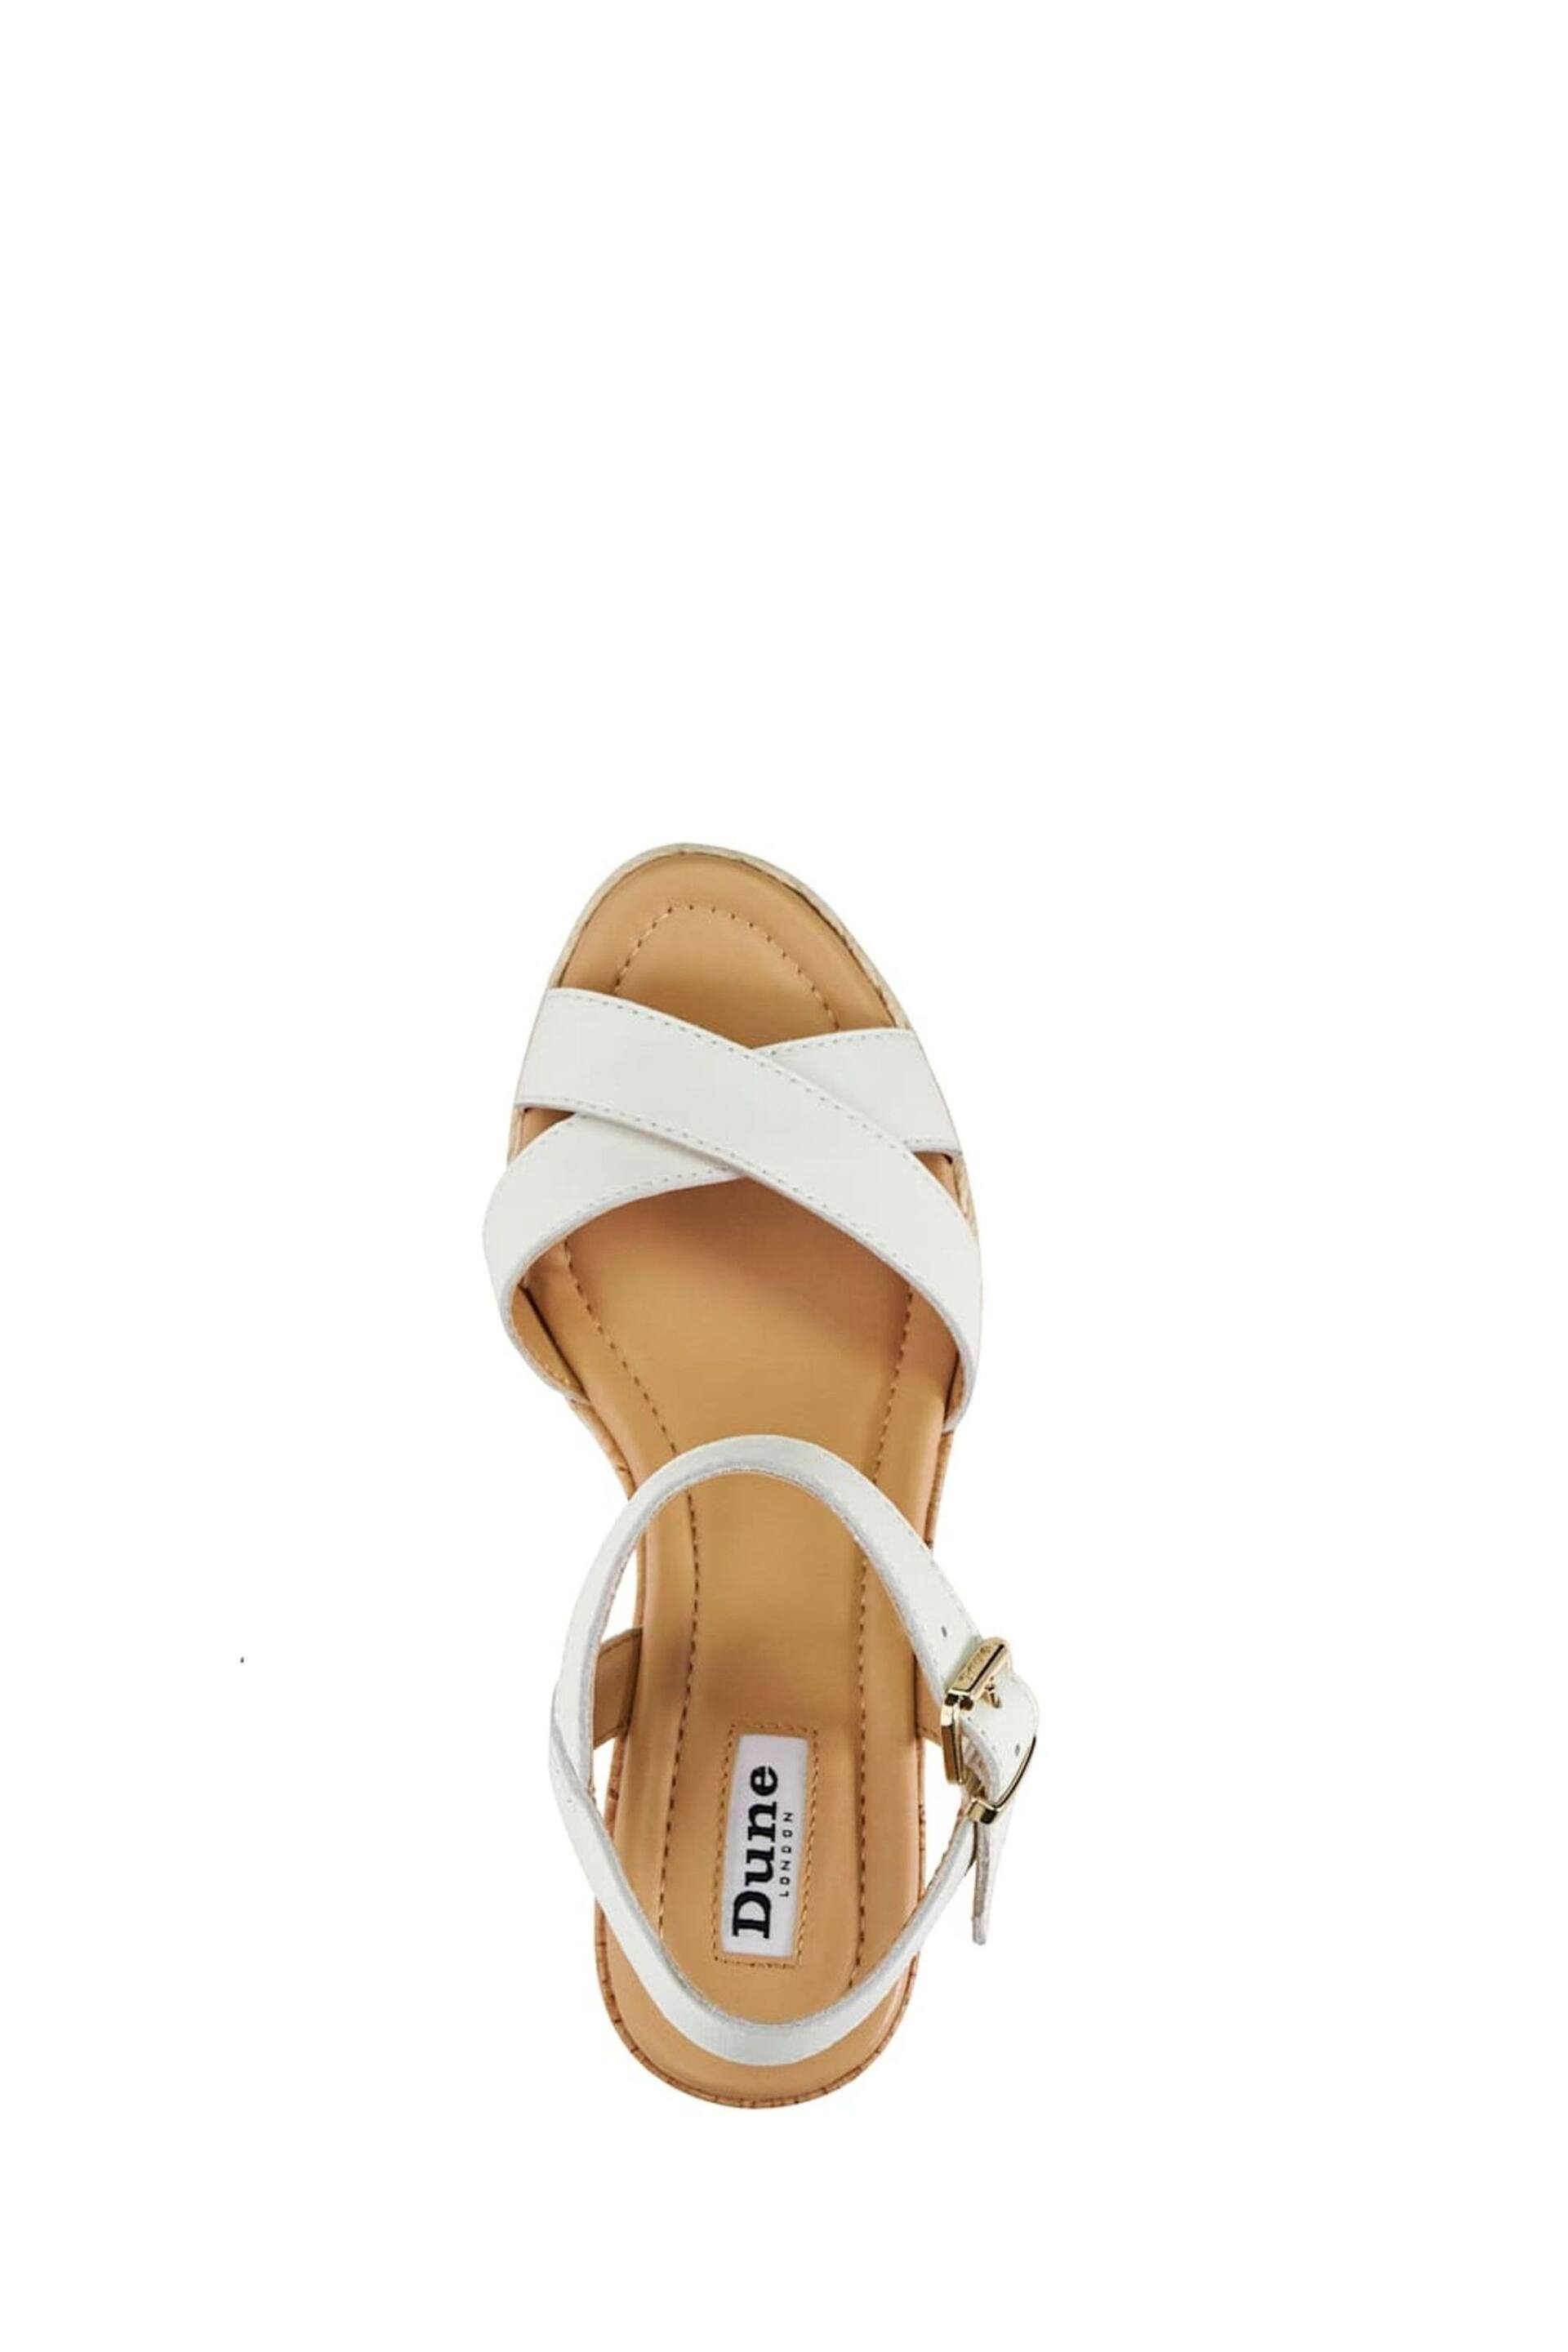 Dune London White Kindest Cross Strap Wedge Sandals - Image 6 of 6